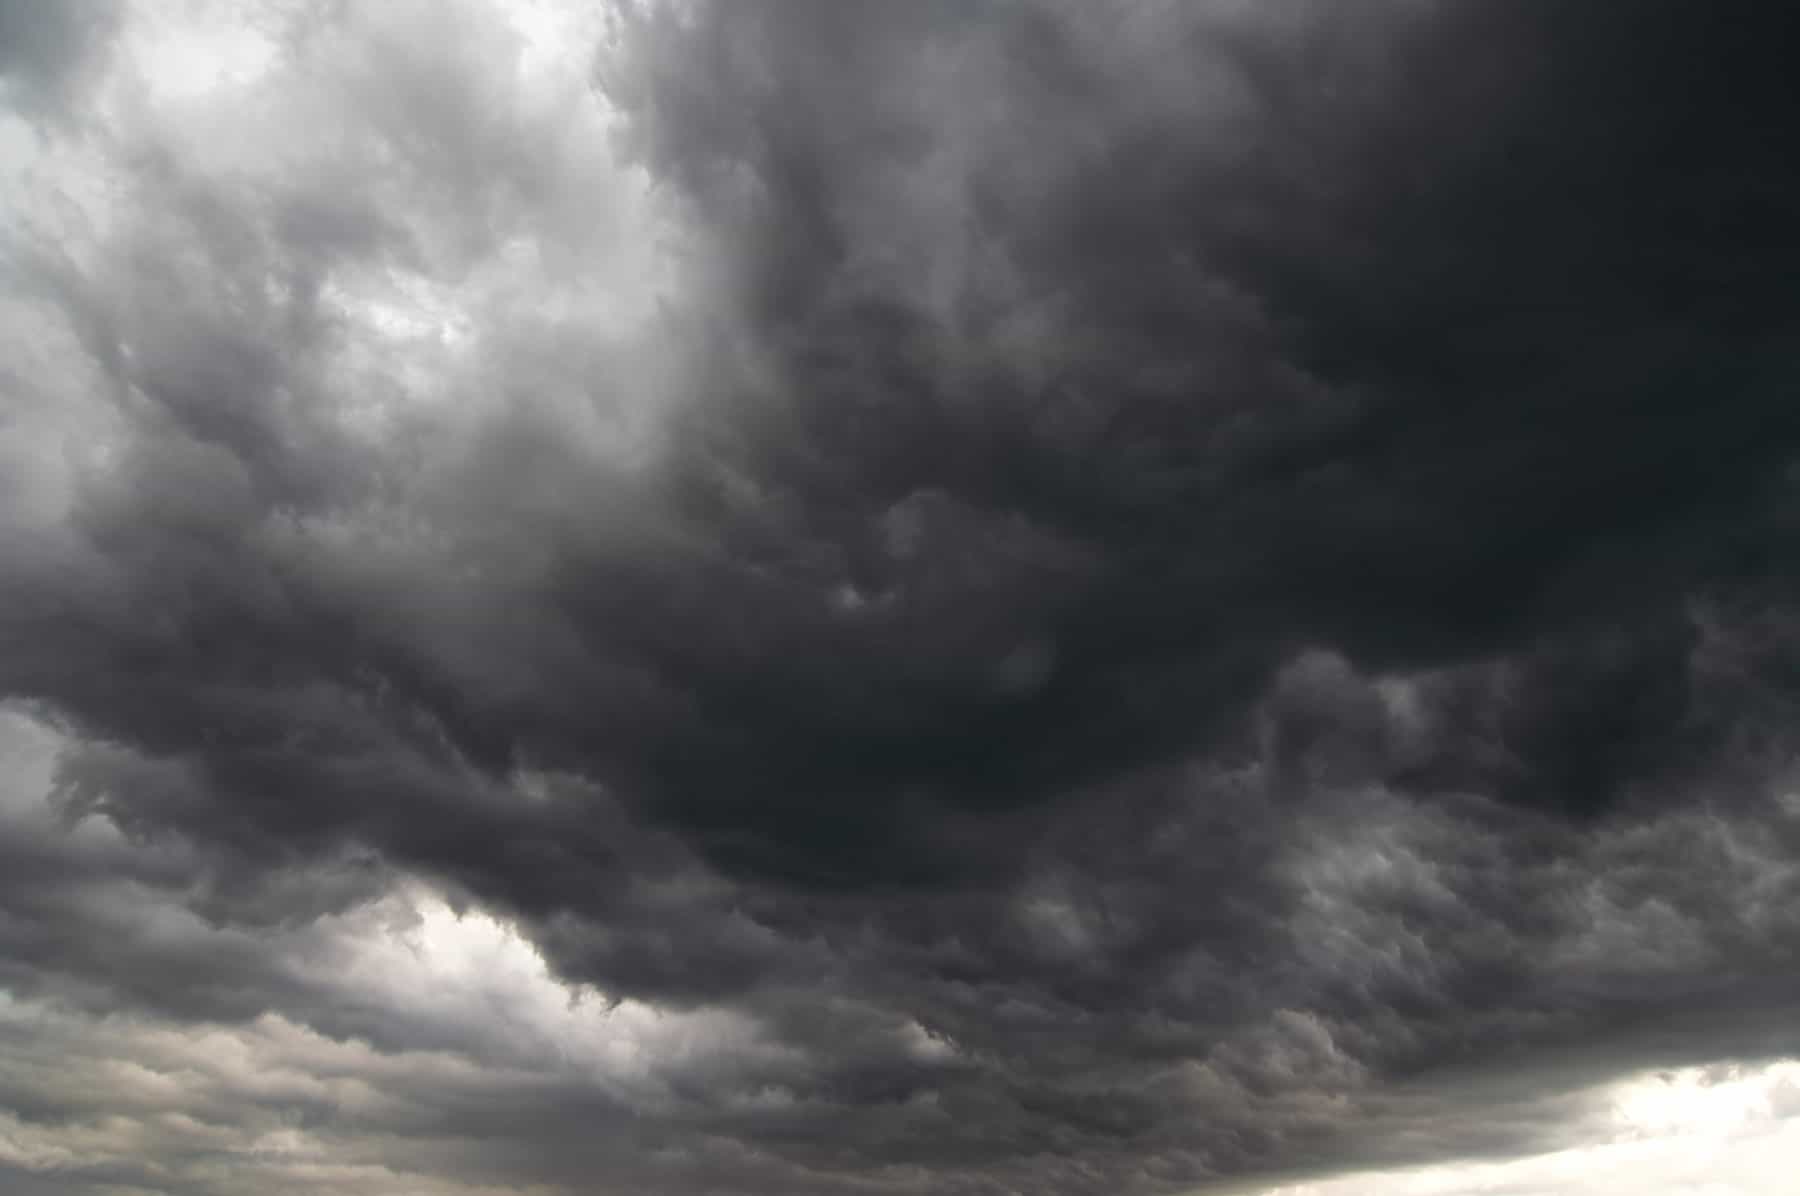 Image of the dark storm clouds - before the rain